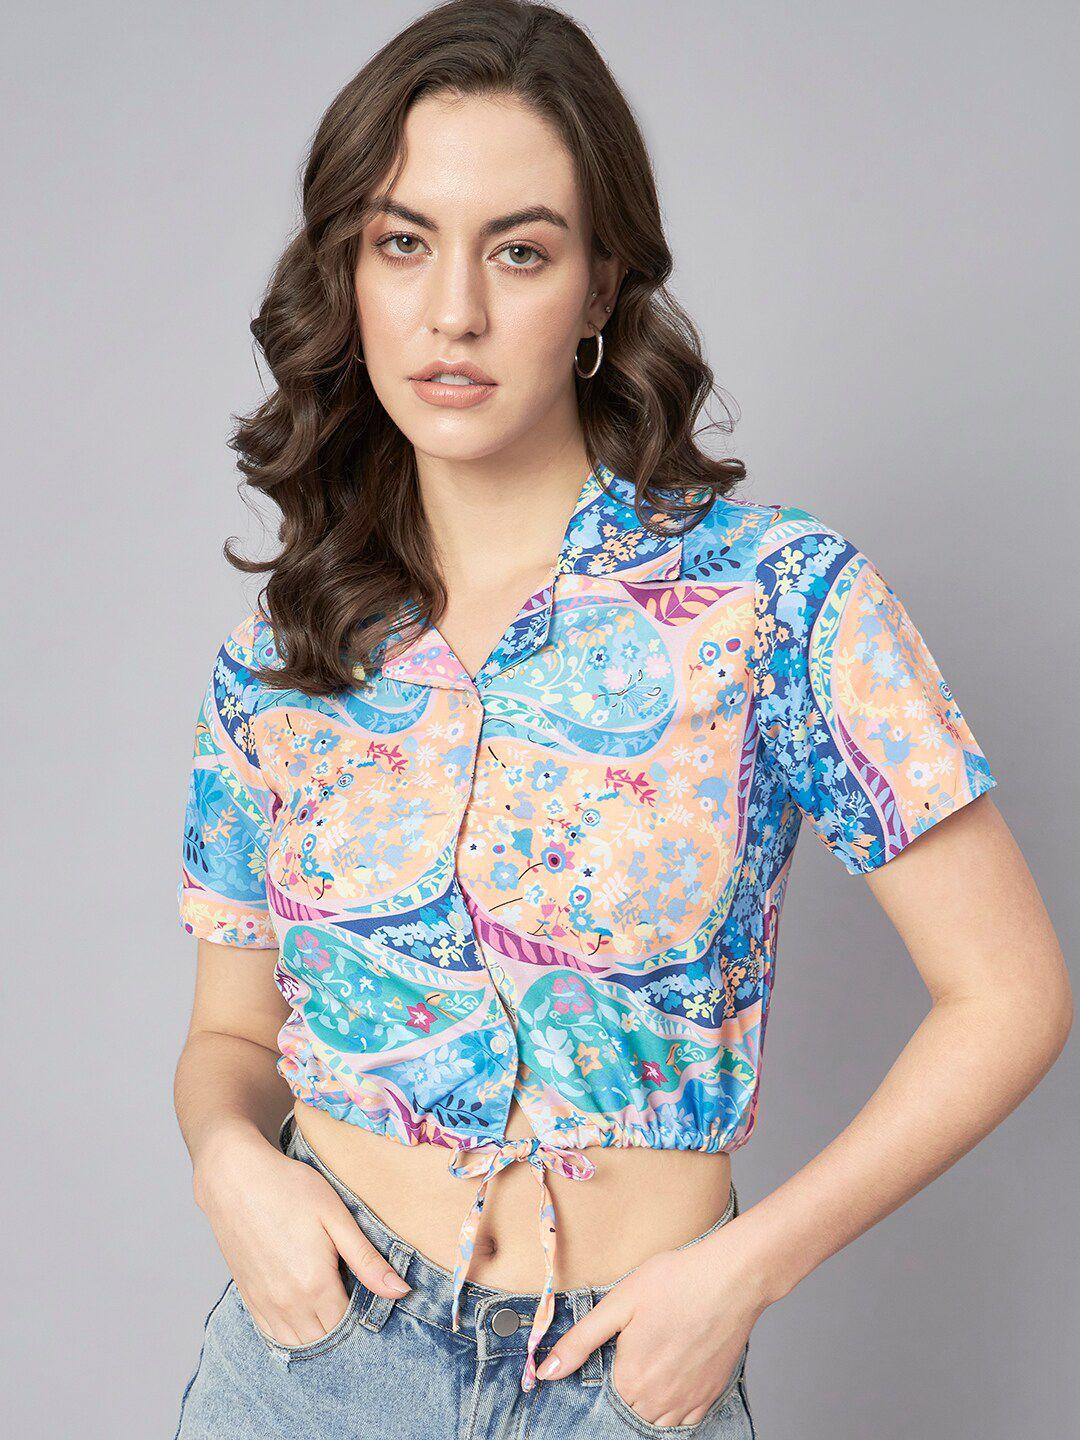 the dry state blue floral printed shirt style crop top